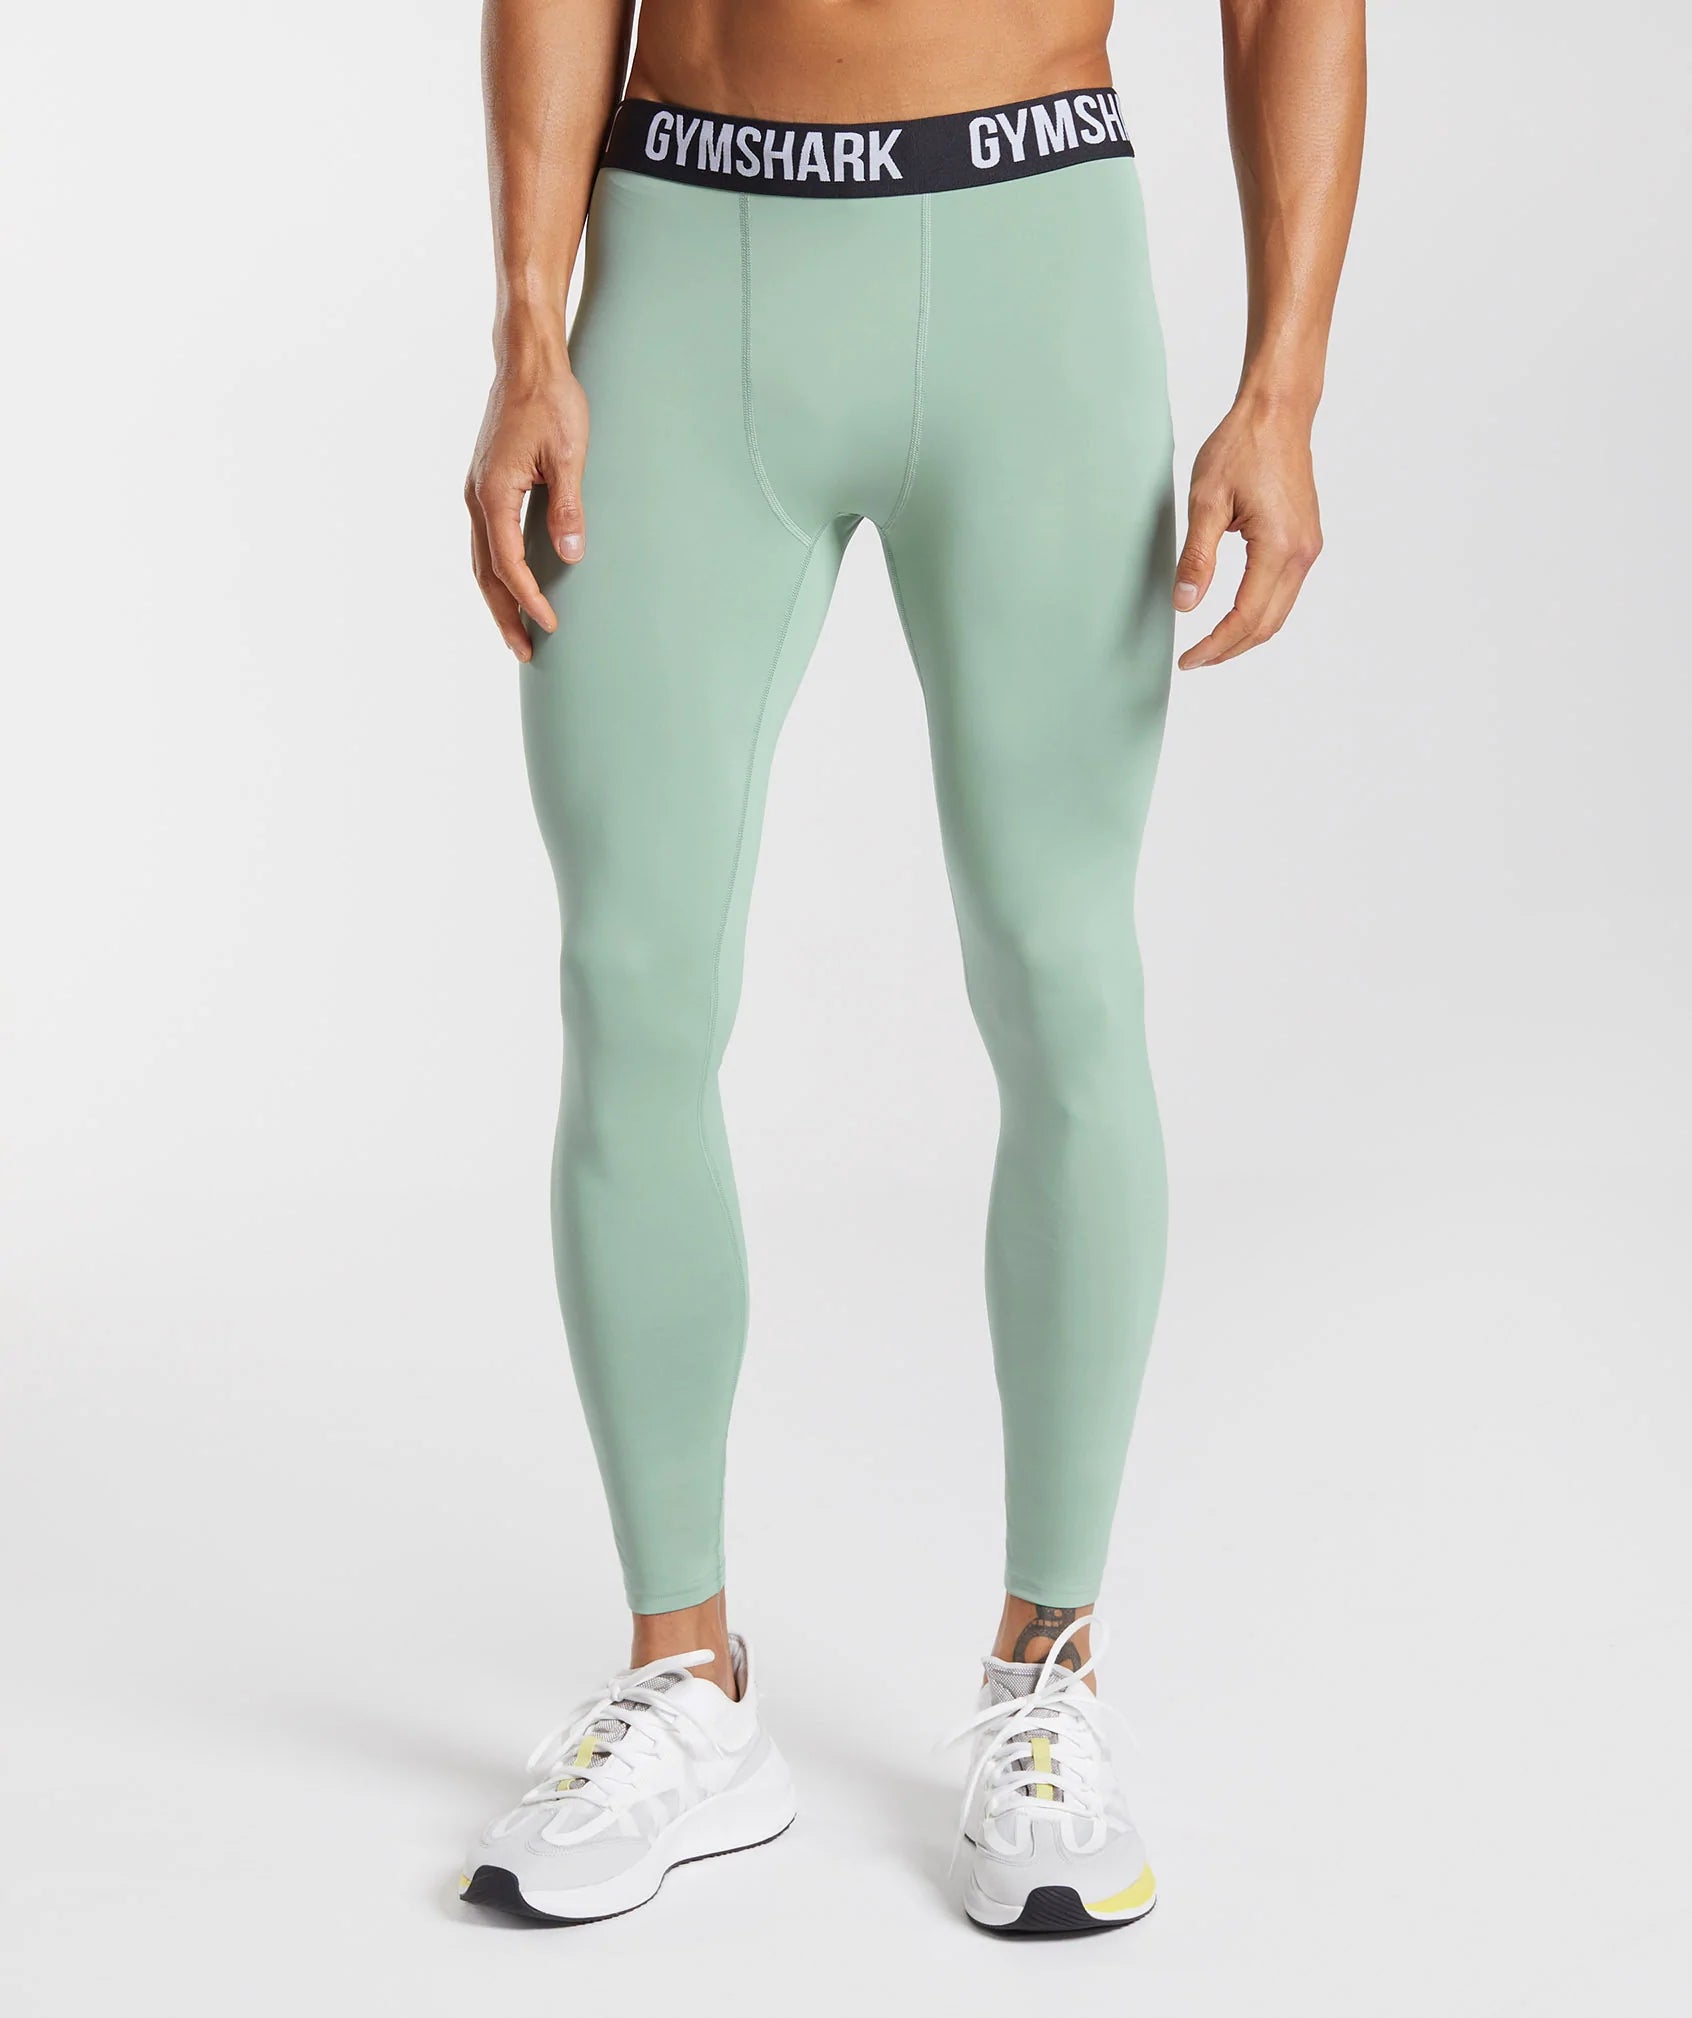 Element Baselayer Legging in {{variantColor} is out of stock